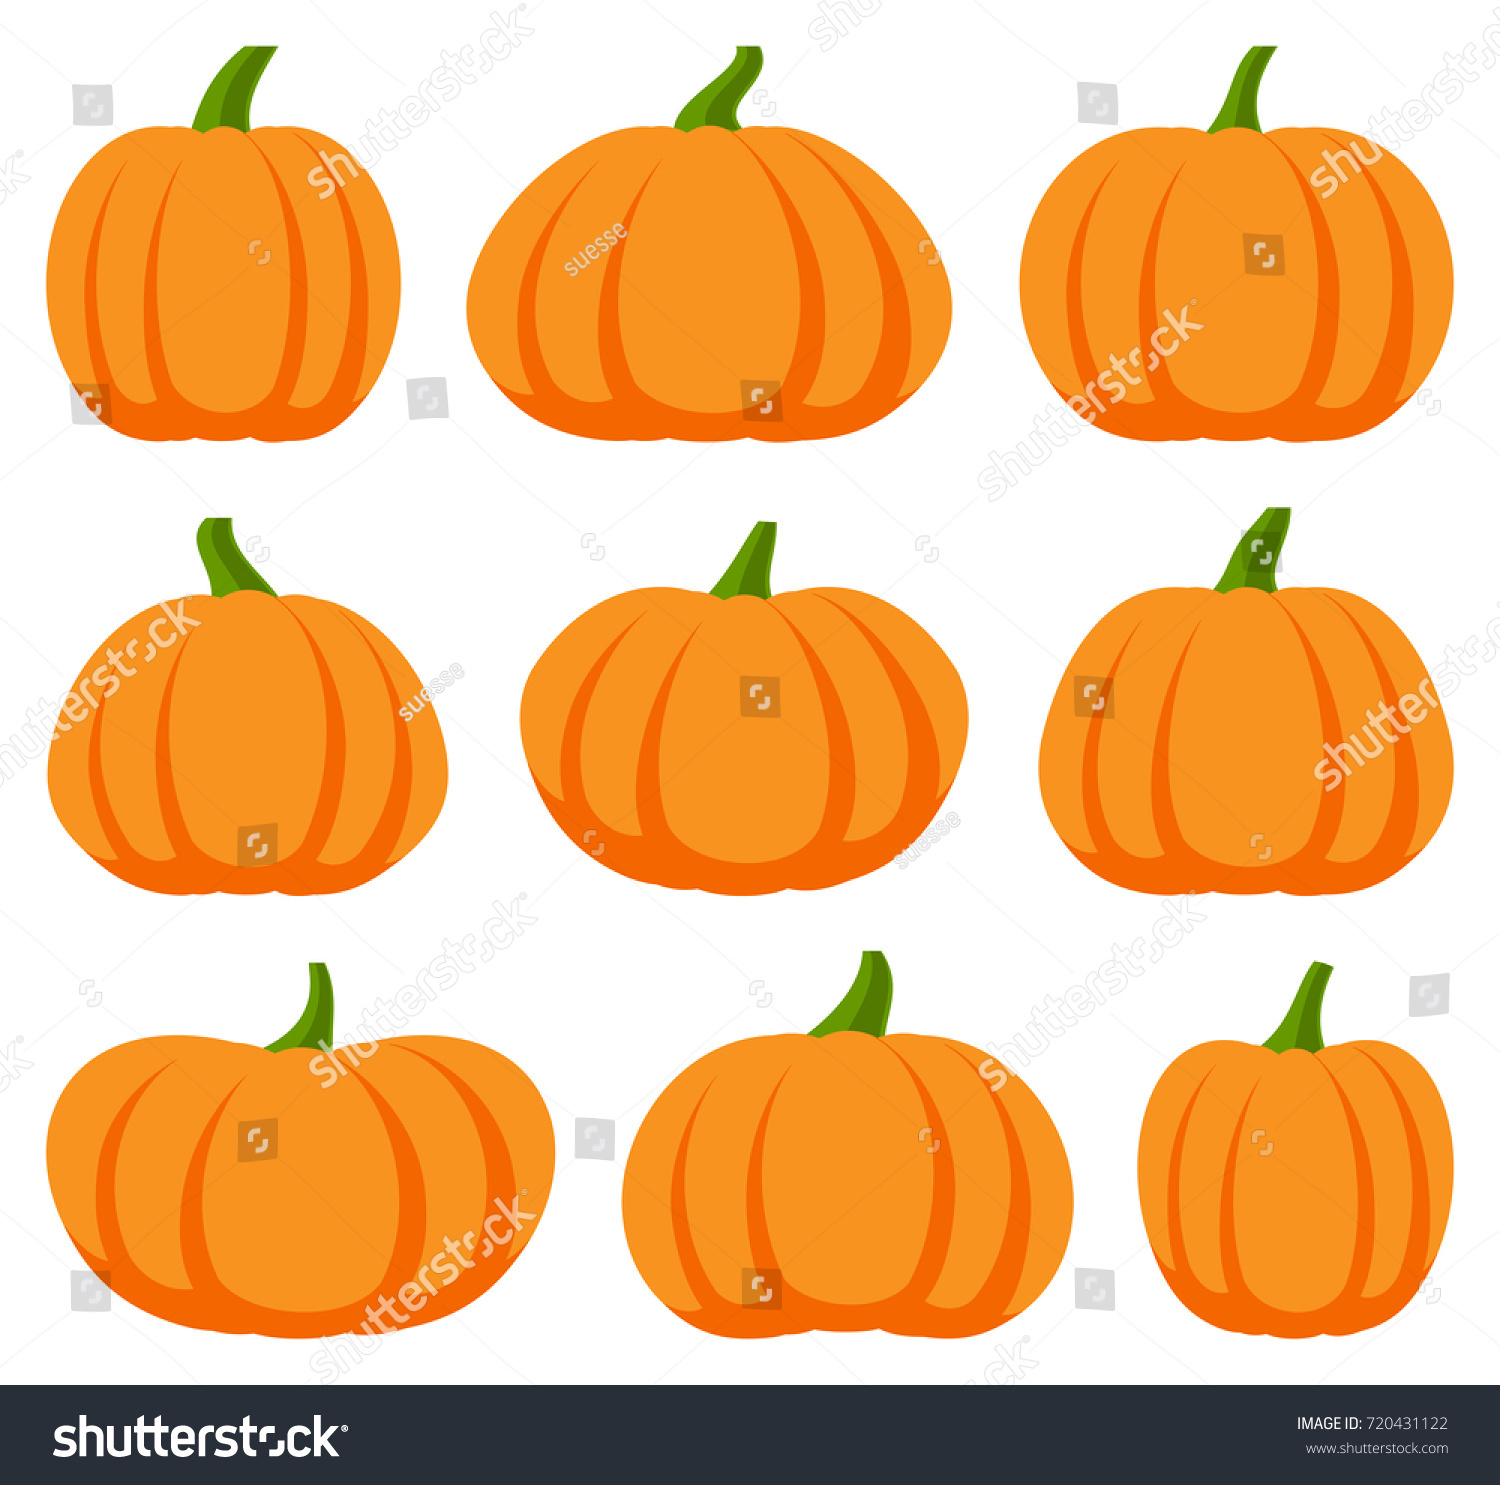 Cartoon halloween pumpkin set. Different shapes and sizes orange gourd isolated on white background. Vector illustration #720431122